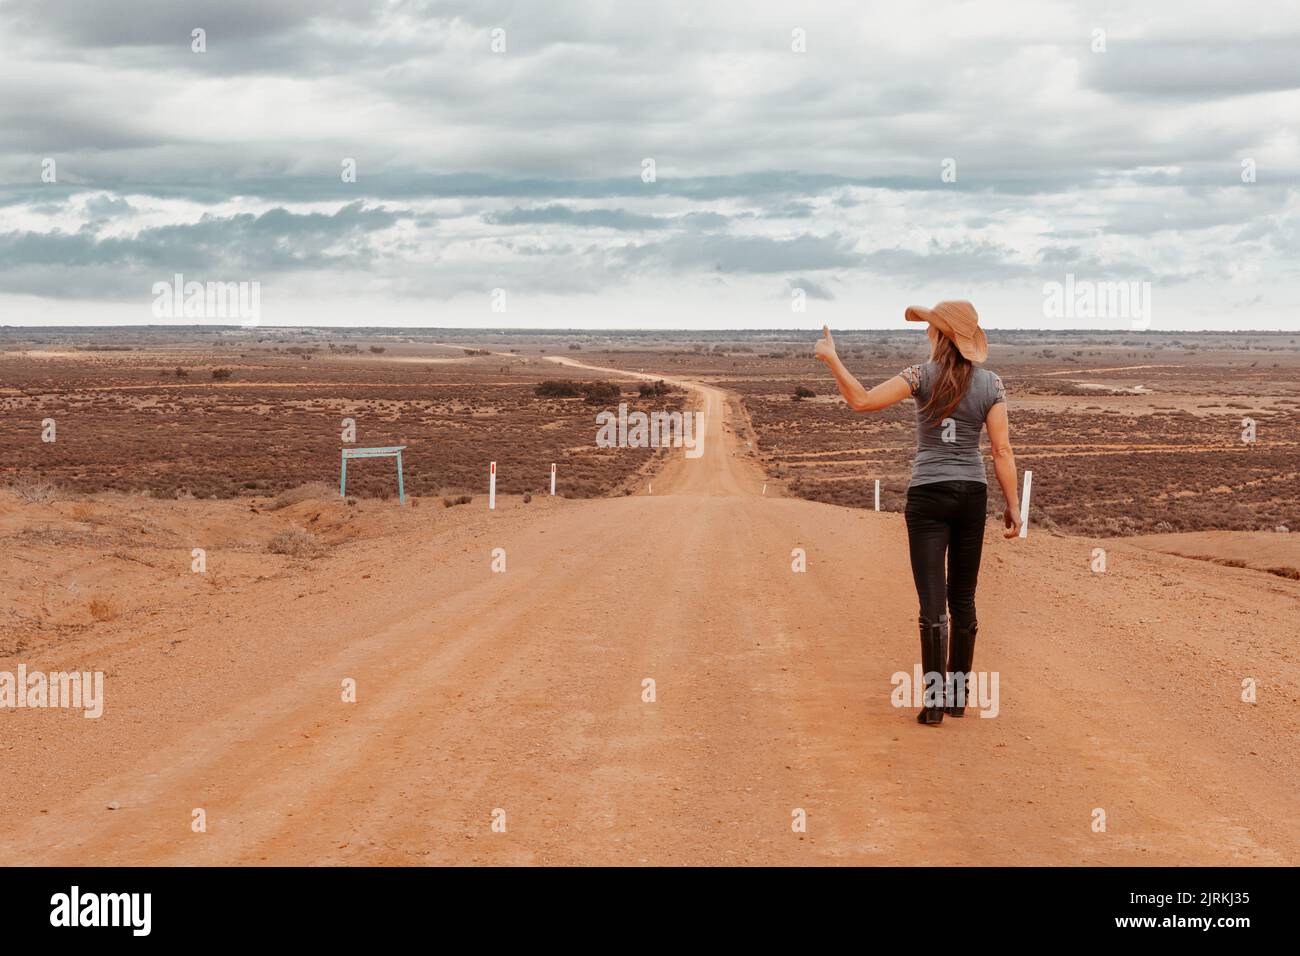 The Australian outback is harsh environment with long roads to nowhere with dried up lakes Stock Photo